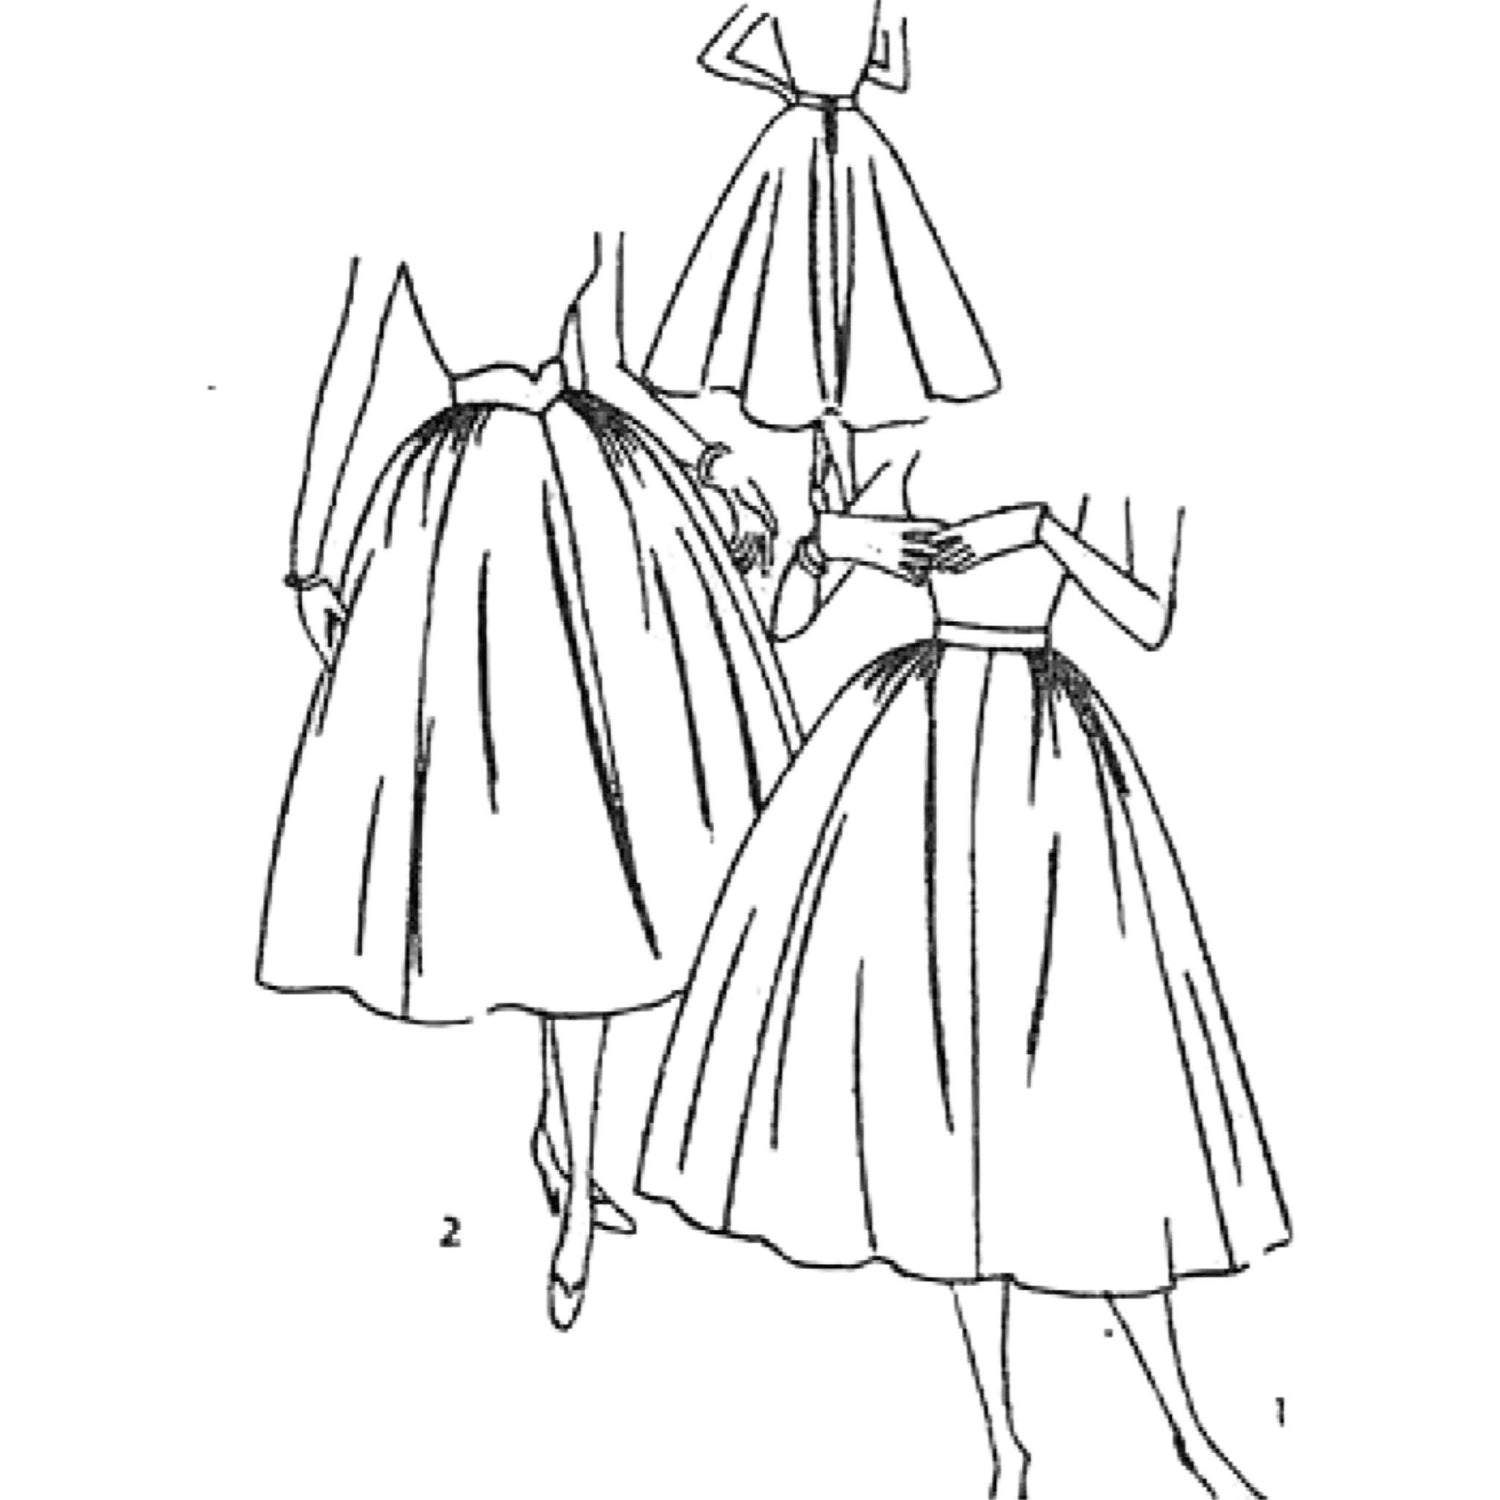 Line drawing of skirts